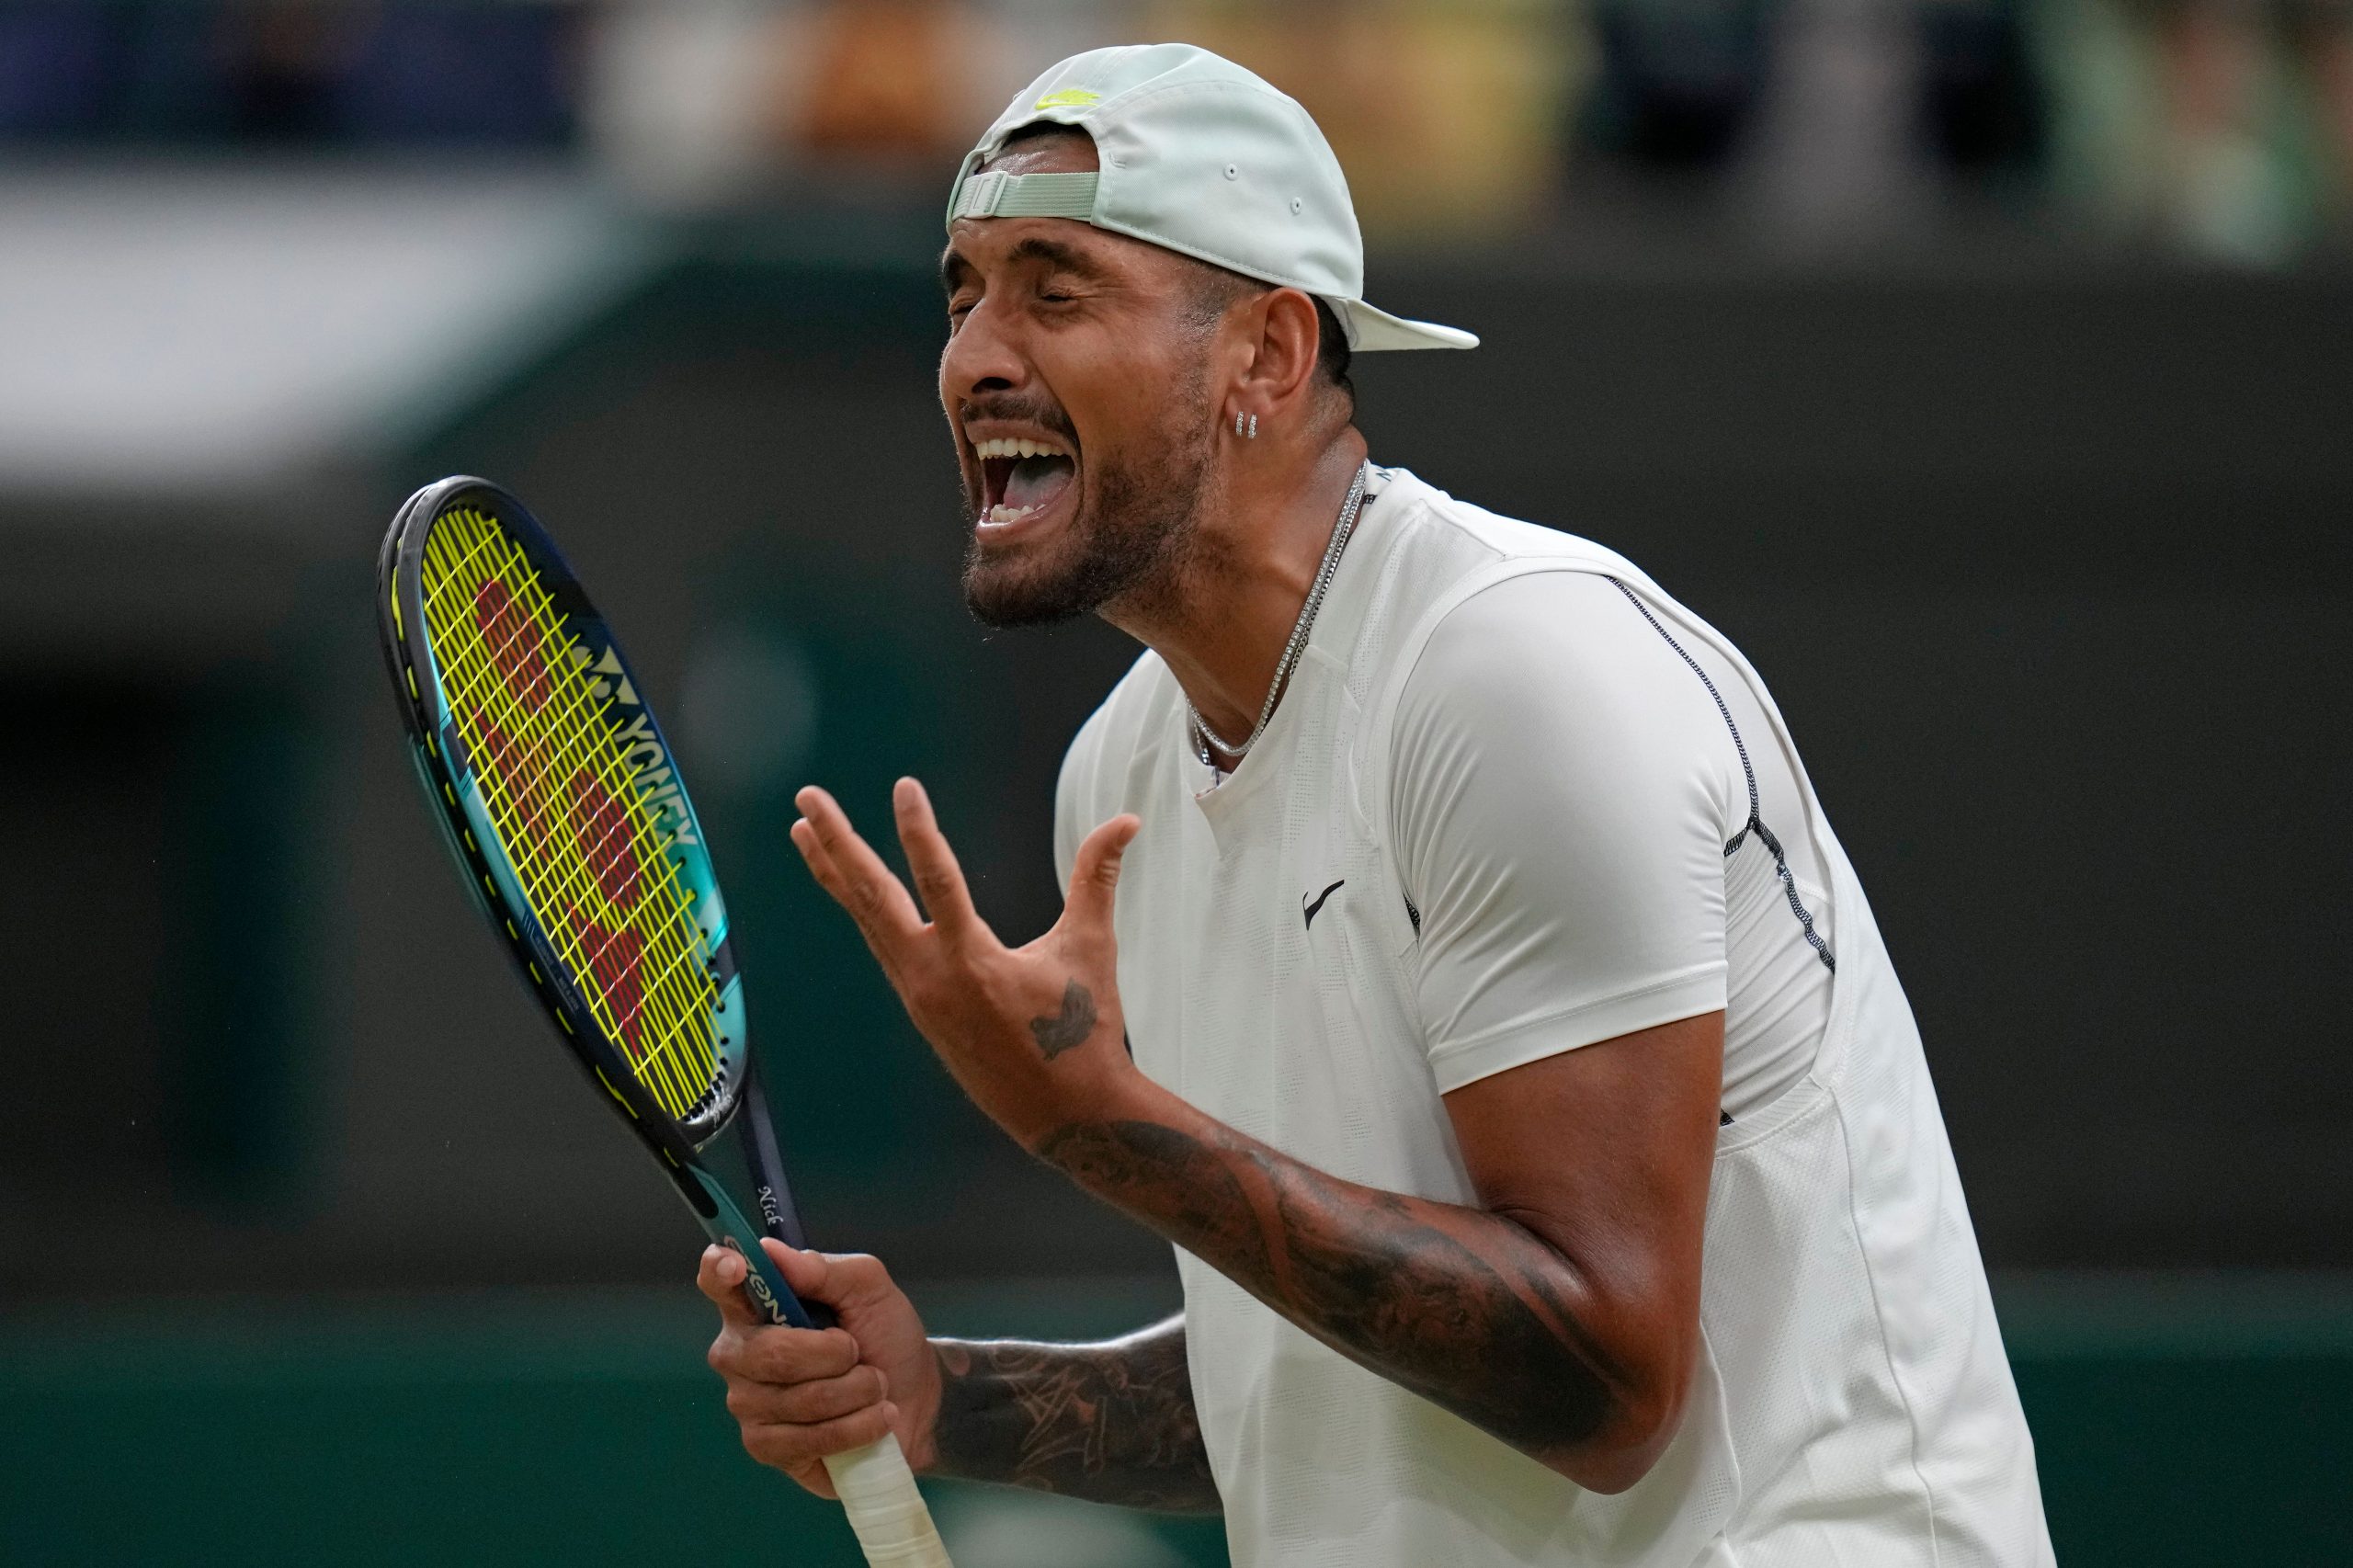 Wimbledon runner up prize money: How much will Nick Kyrgios make?